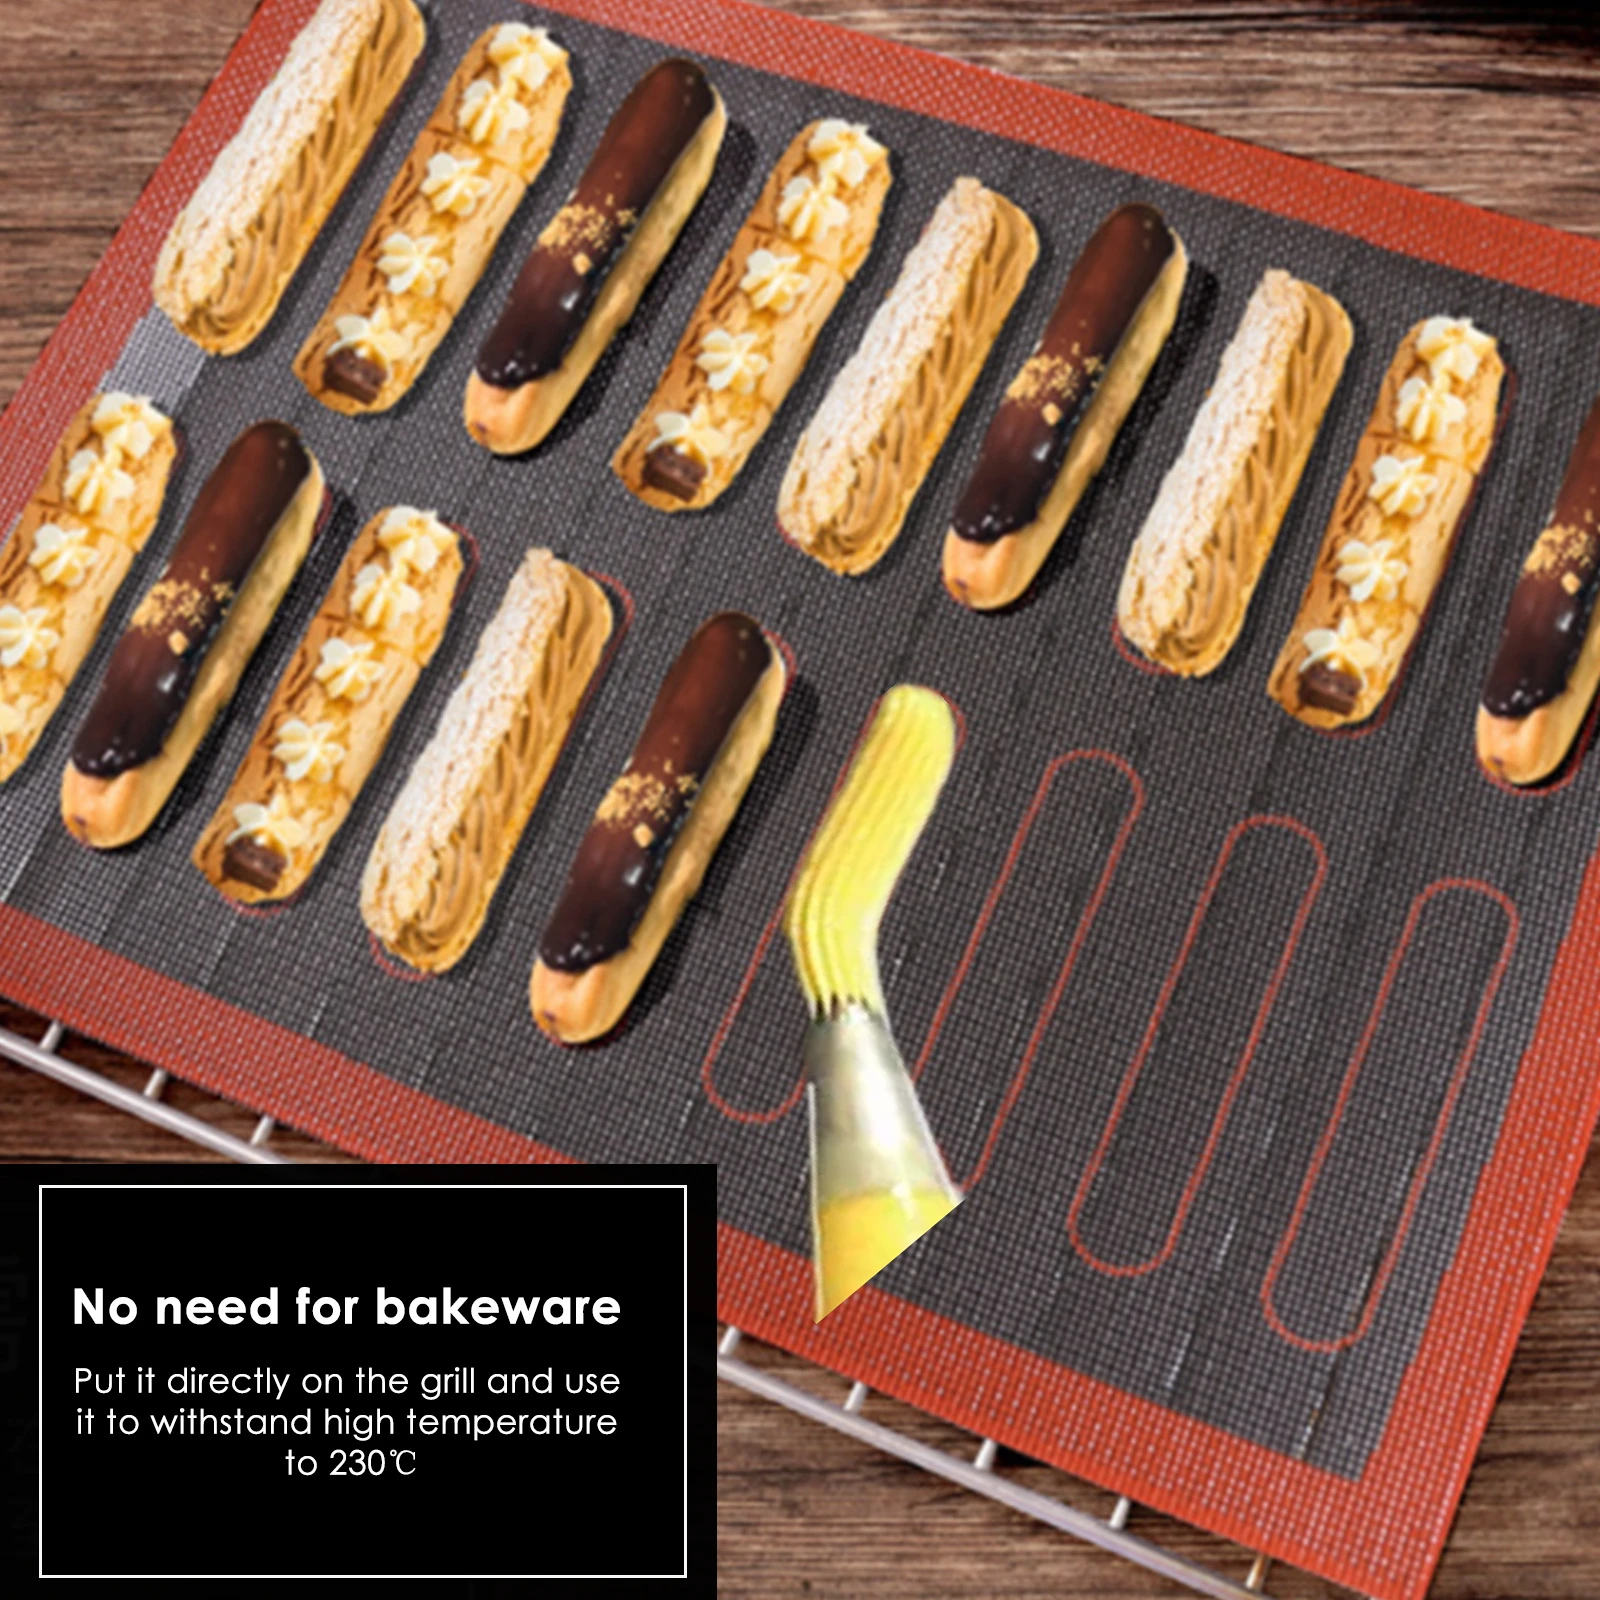 

Non Stick Baking Mat Perforated Silicone Pastry Tool Kitchen Bakeware Accessories Oven Sheet Liner for Cookie /Bread/ /Puff